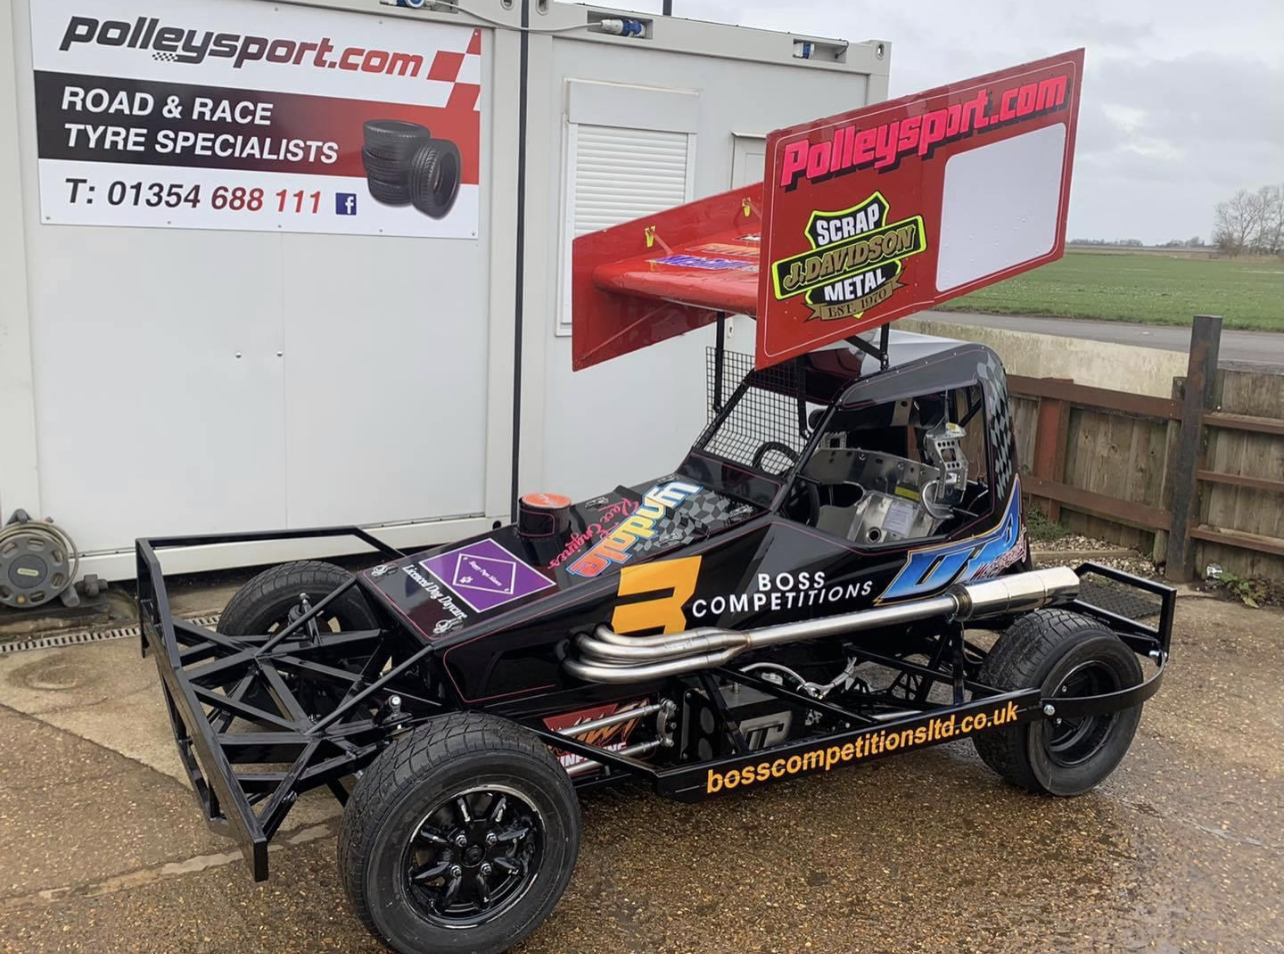 A TEST DAY + 5 RACE MEETINGS IN A BRISCA F2